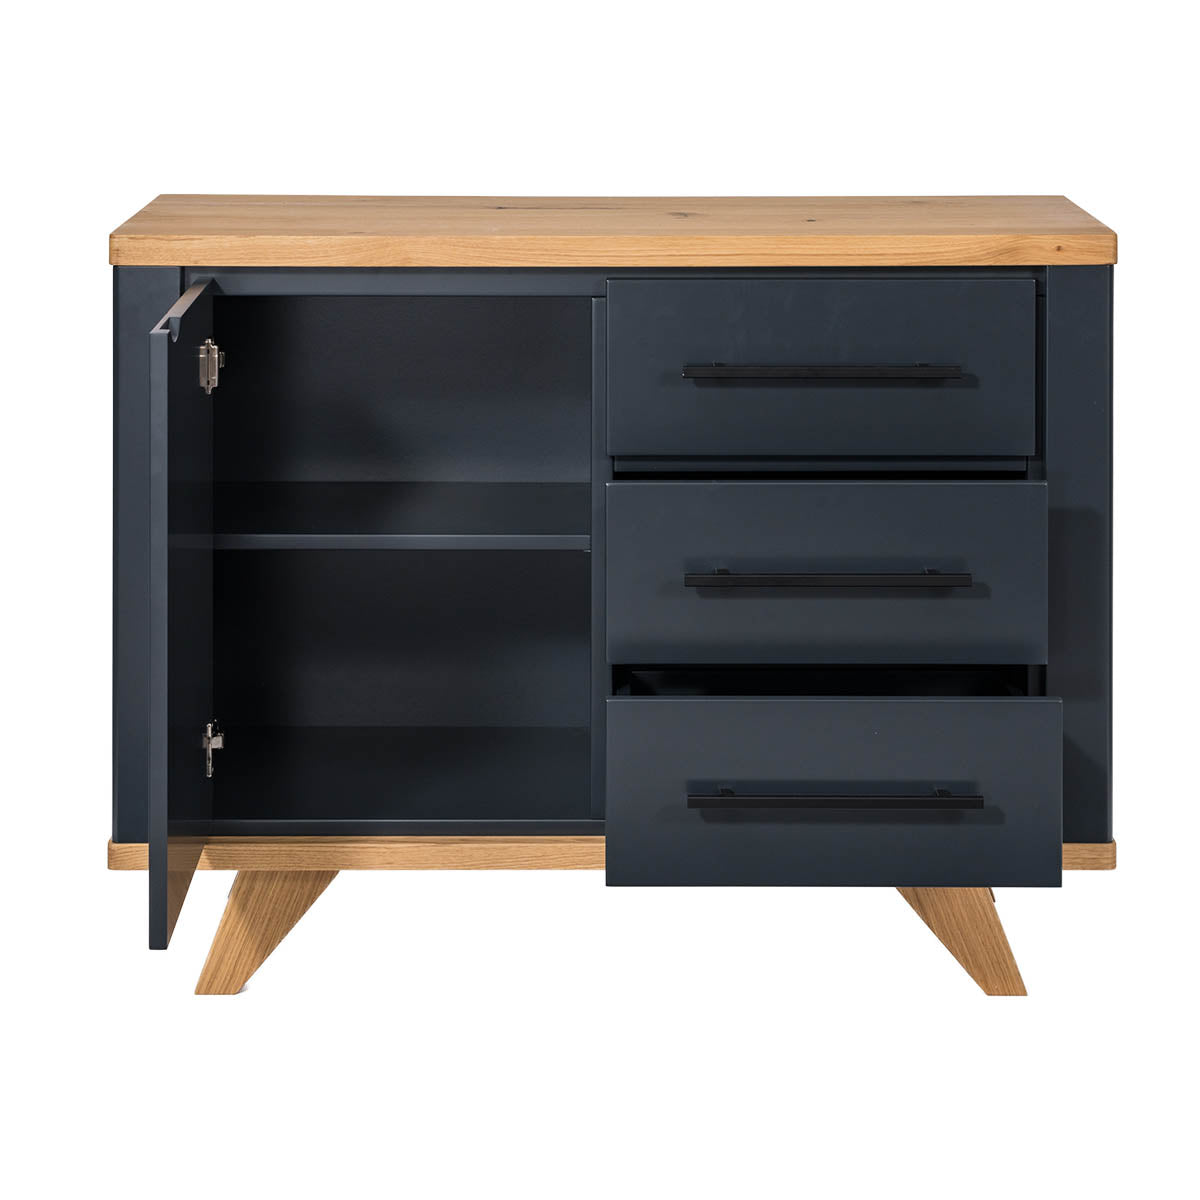 Peter - Sideboard XS - Eiche Anthrazit